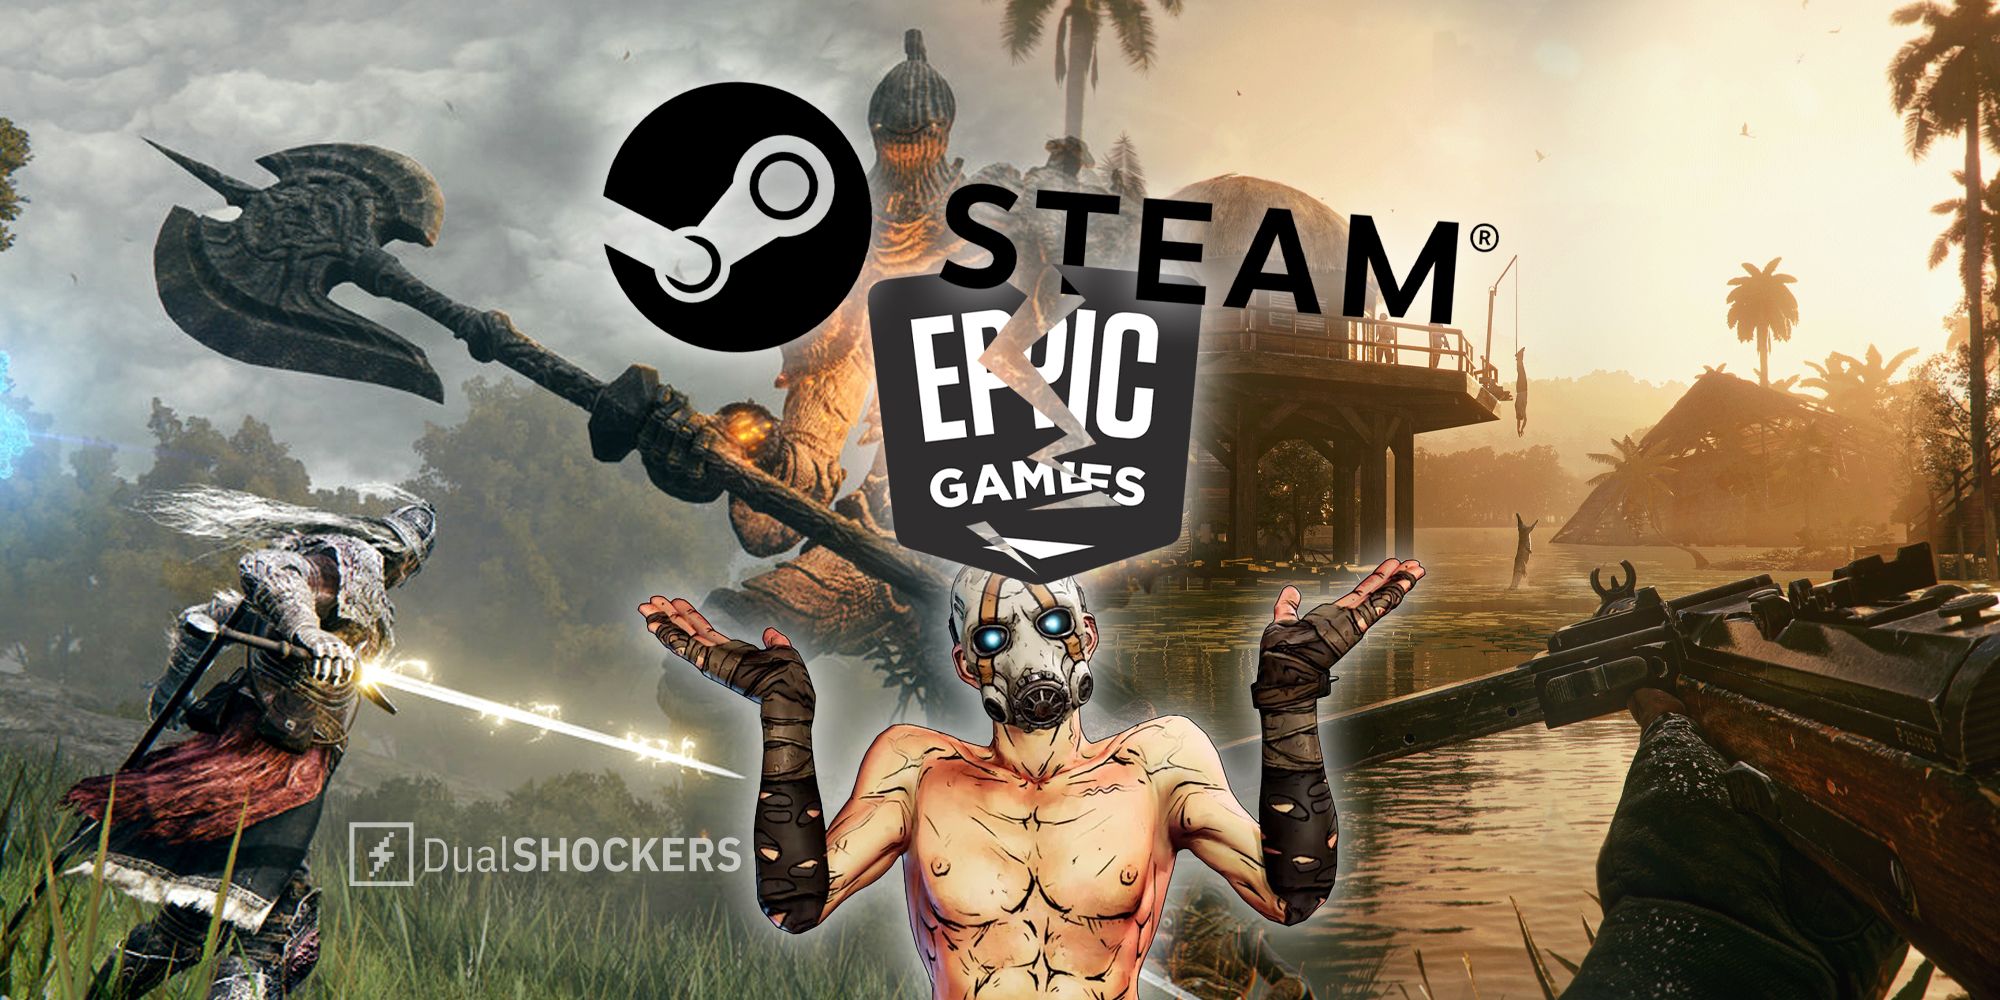 Why Epic's new PC game store is the Steam competitor the industry needed -  The Verge